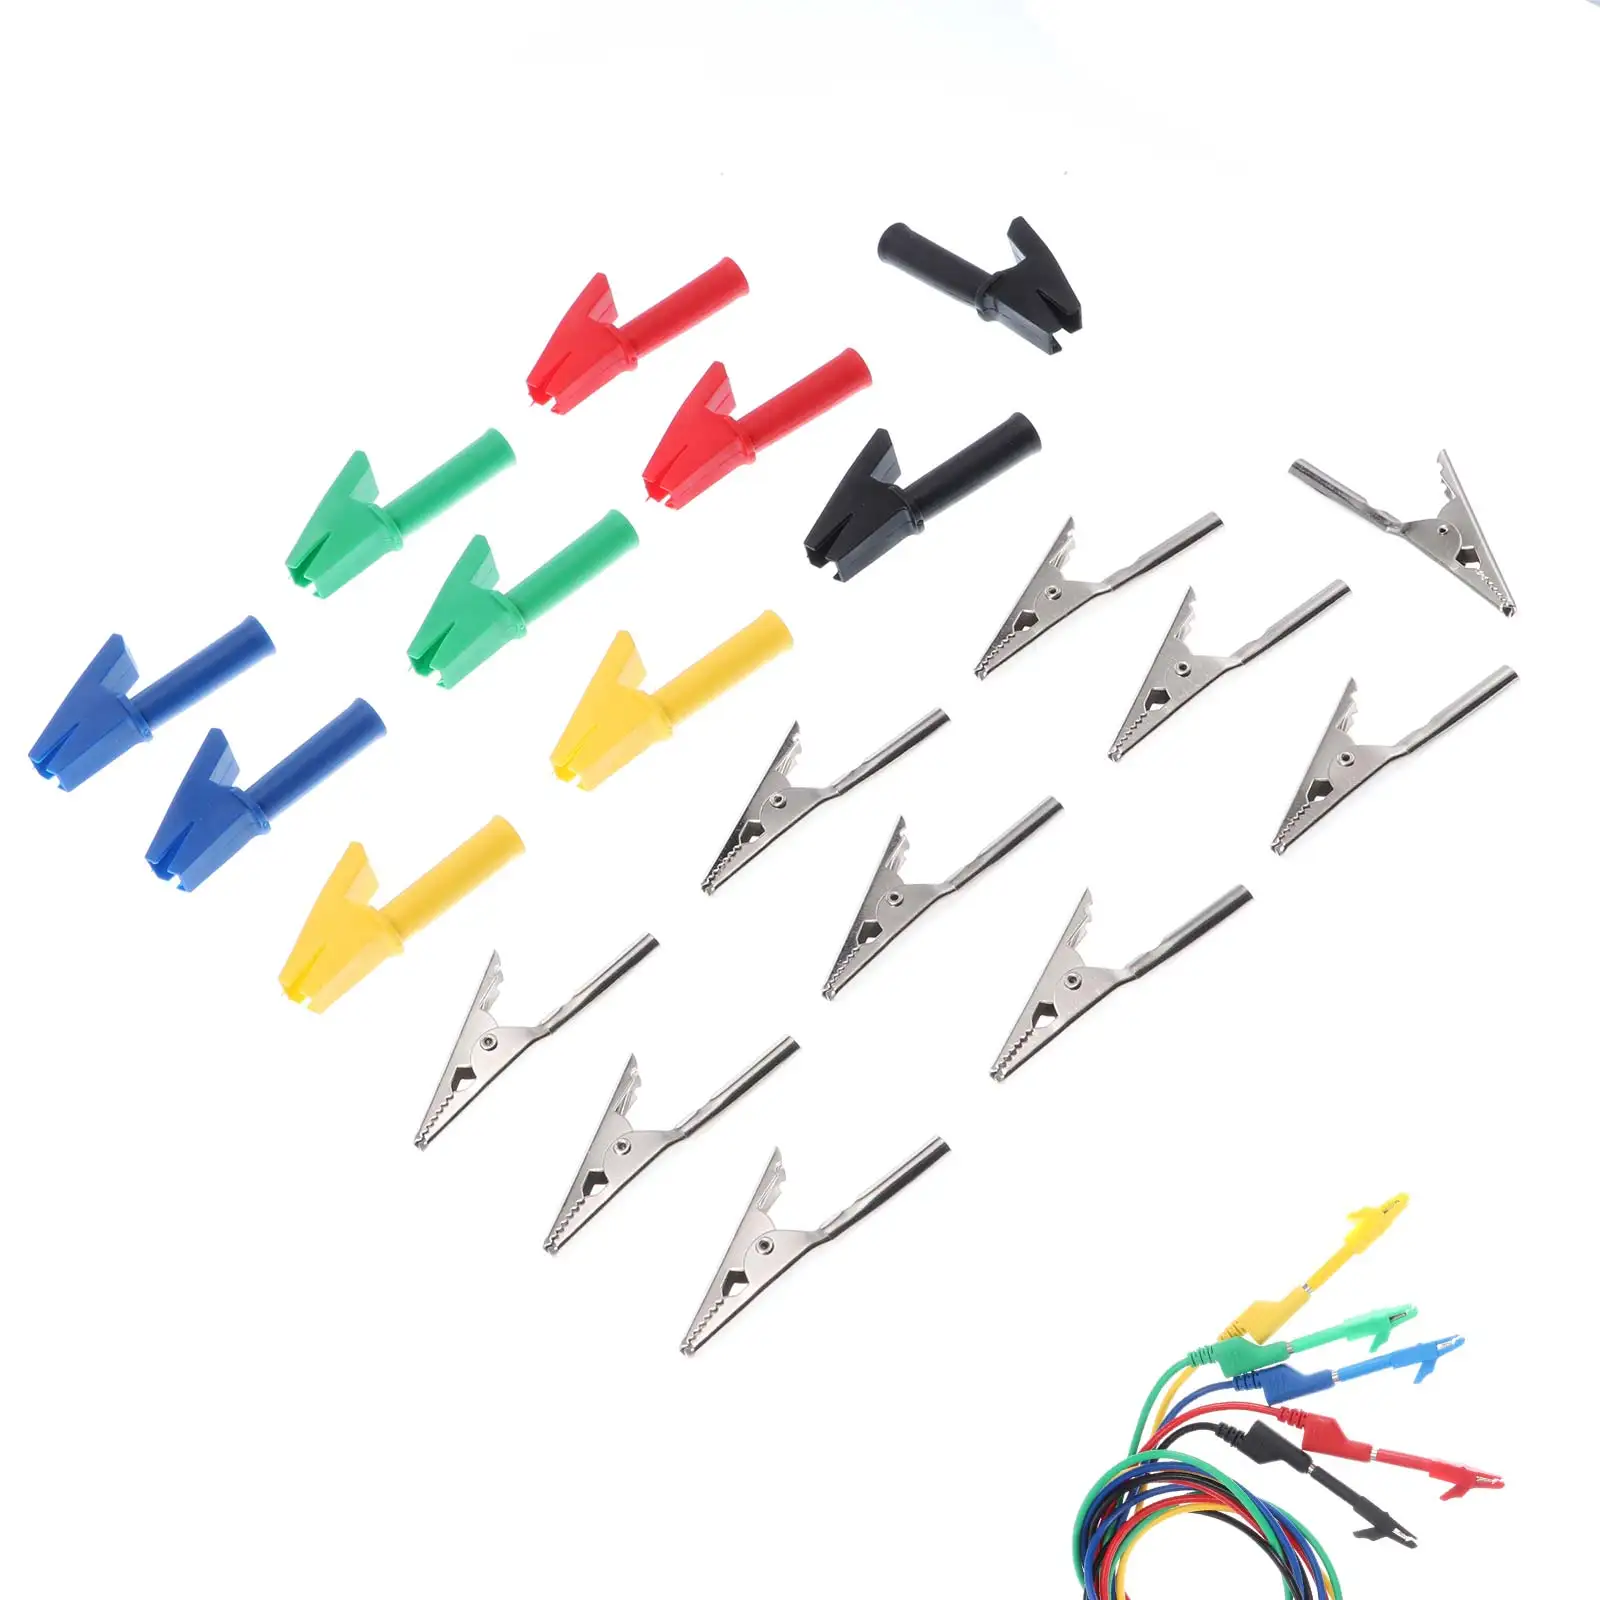 

10Pcs P2002 5-Color 1000V 20A Crocodile Alligator Clips with Spring Safety Test folders for 4mm Banana Plugs